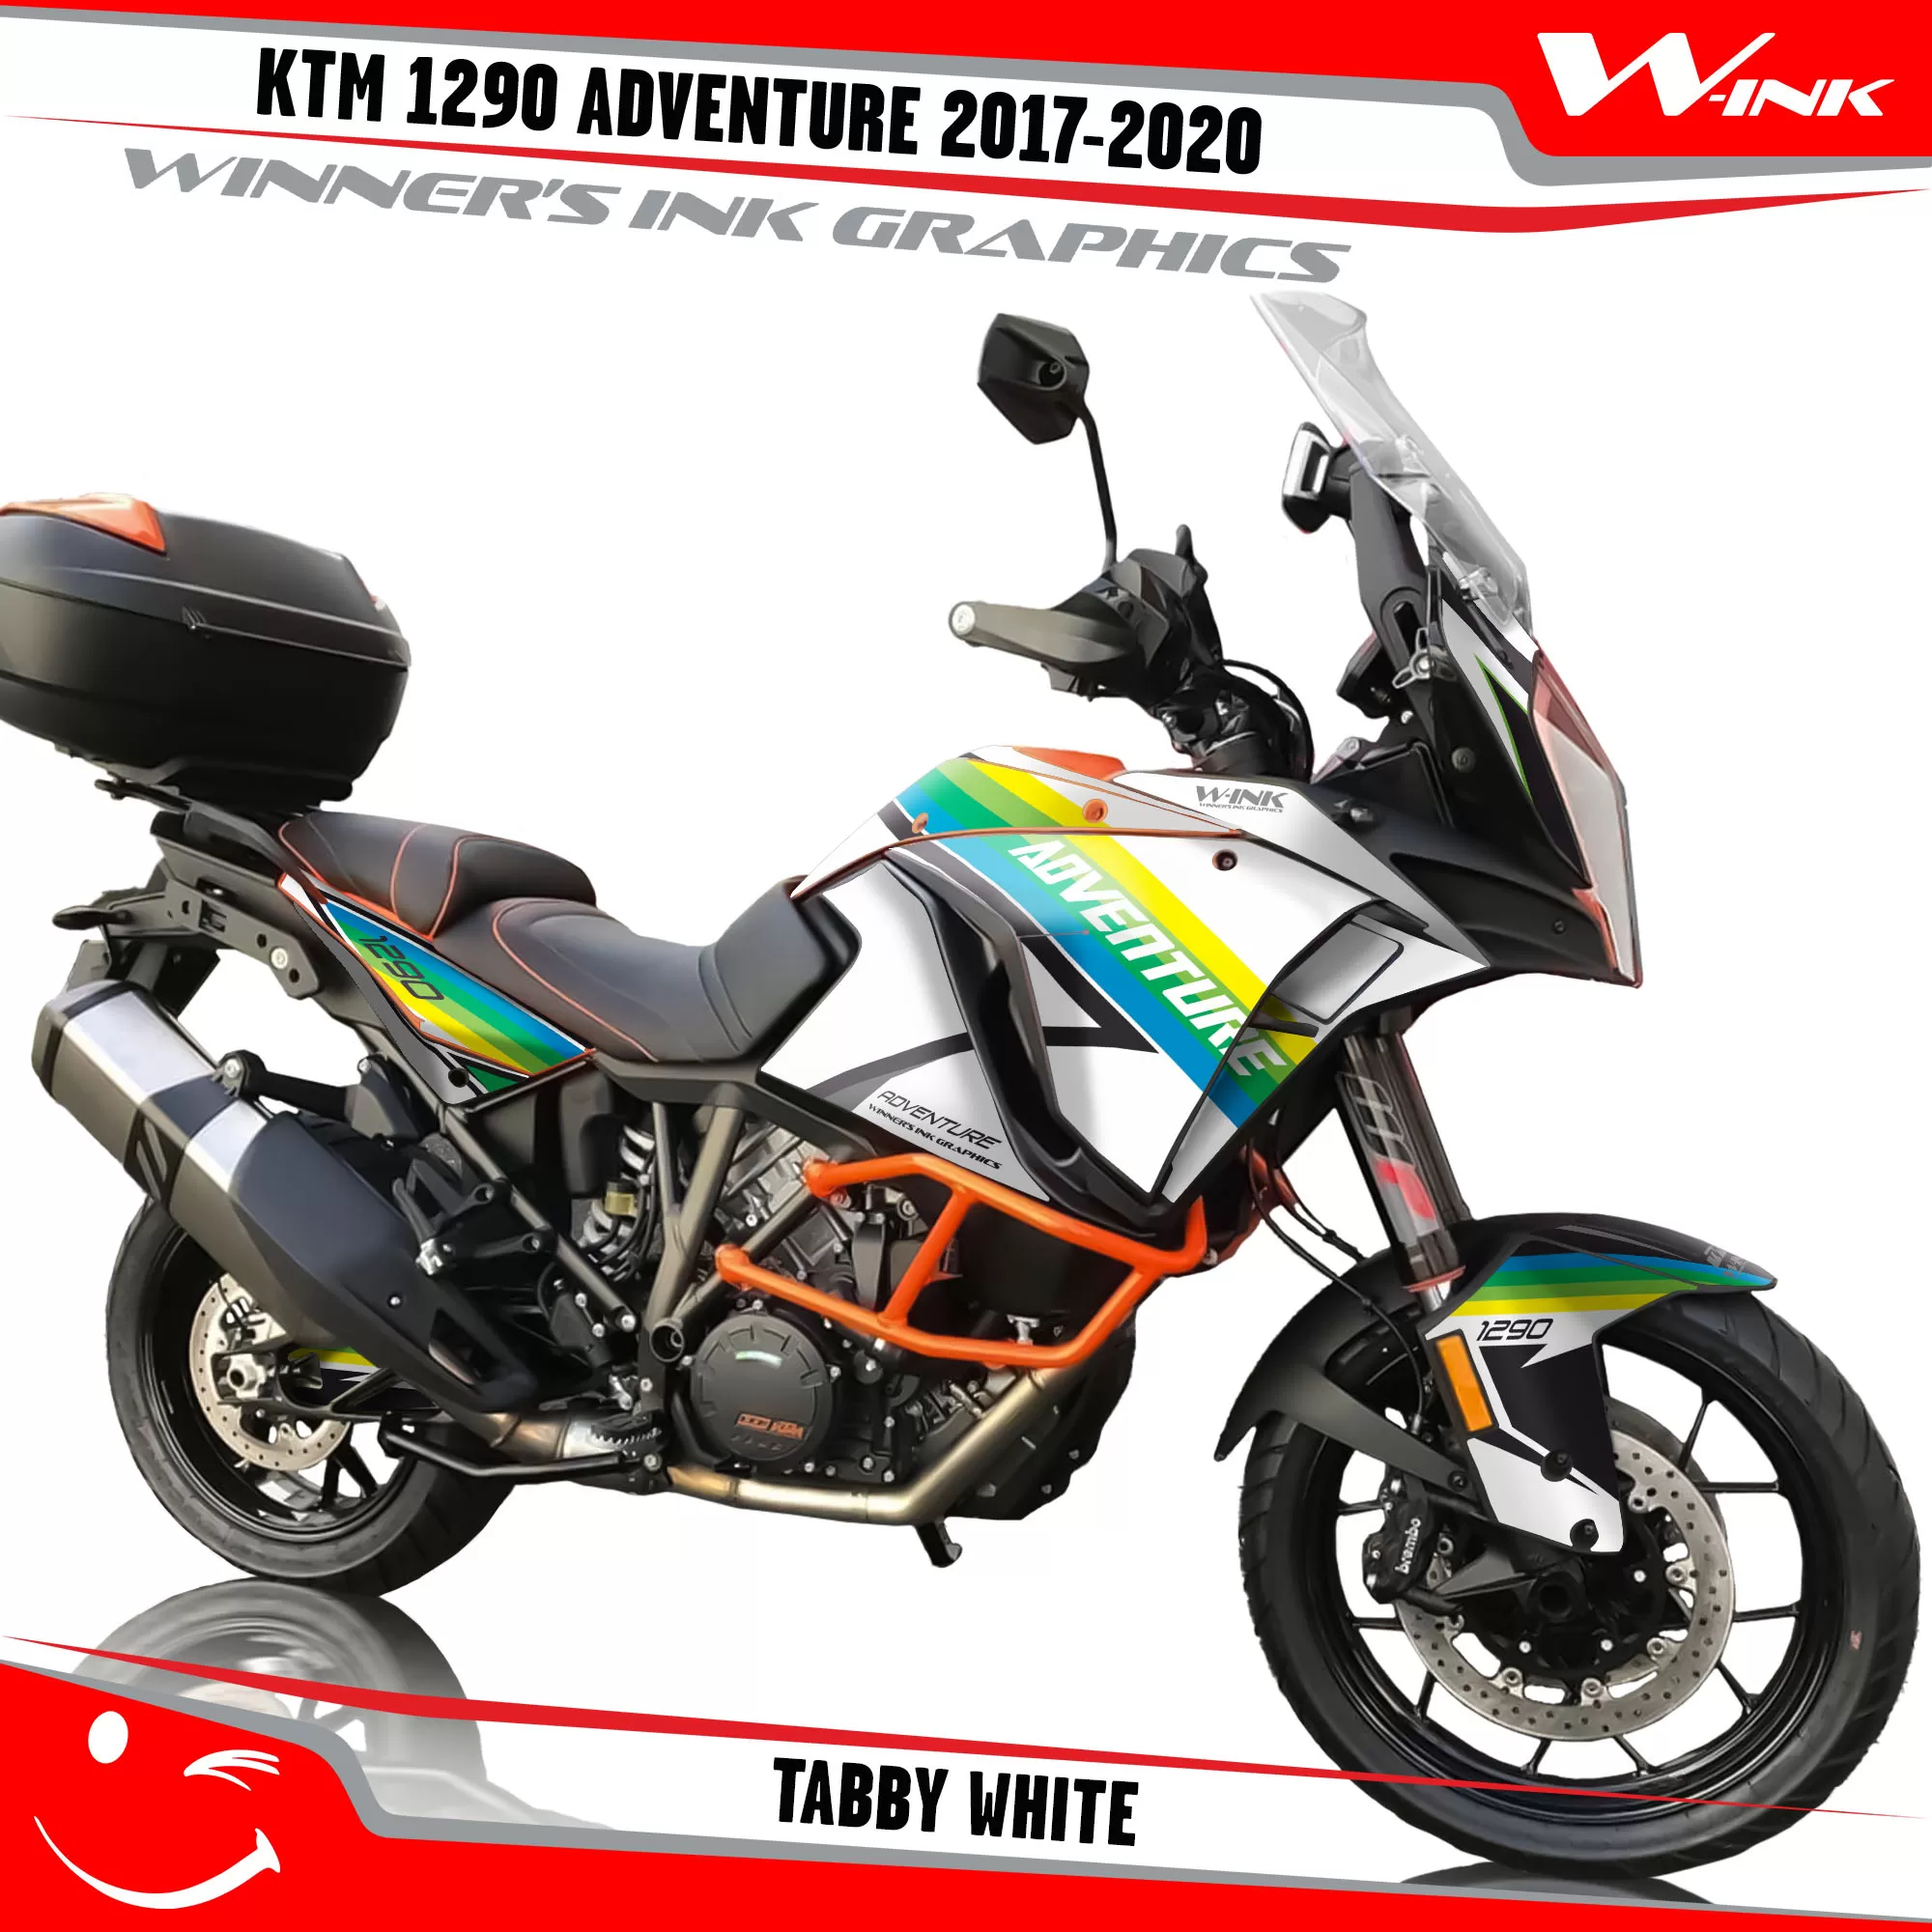 KTM-Adventure-1290-2017-2018-2019-2020-graphics-kit-and-decals-Tabby-White